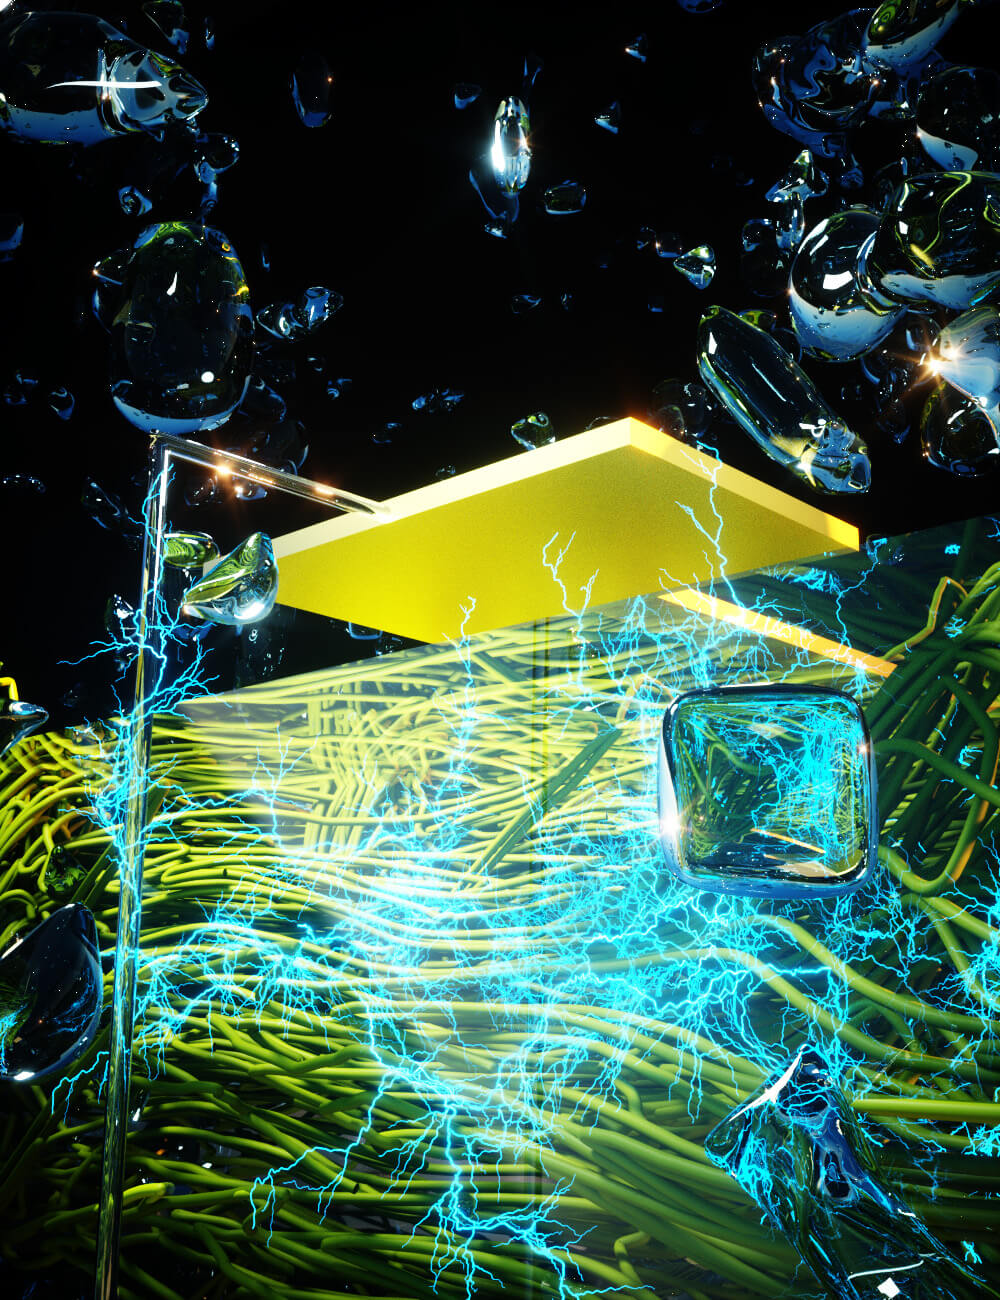 dark image of a floating yellow platform and blue strings of electricity beneath it